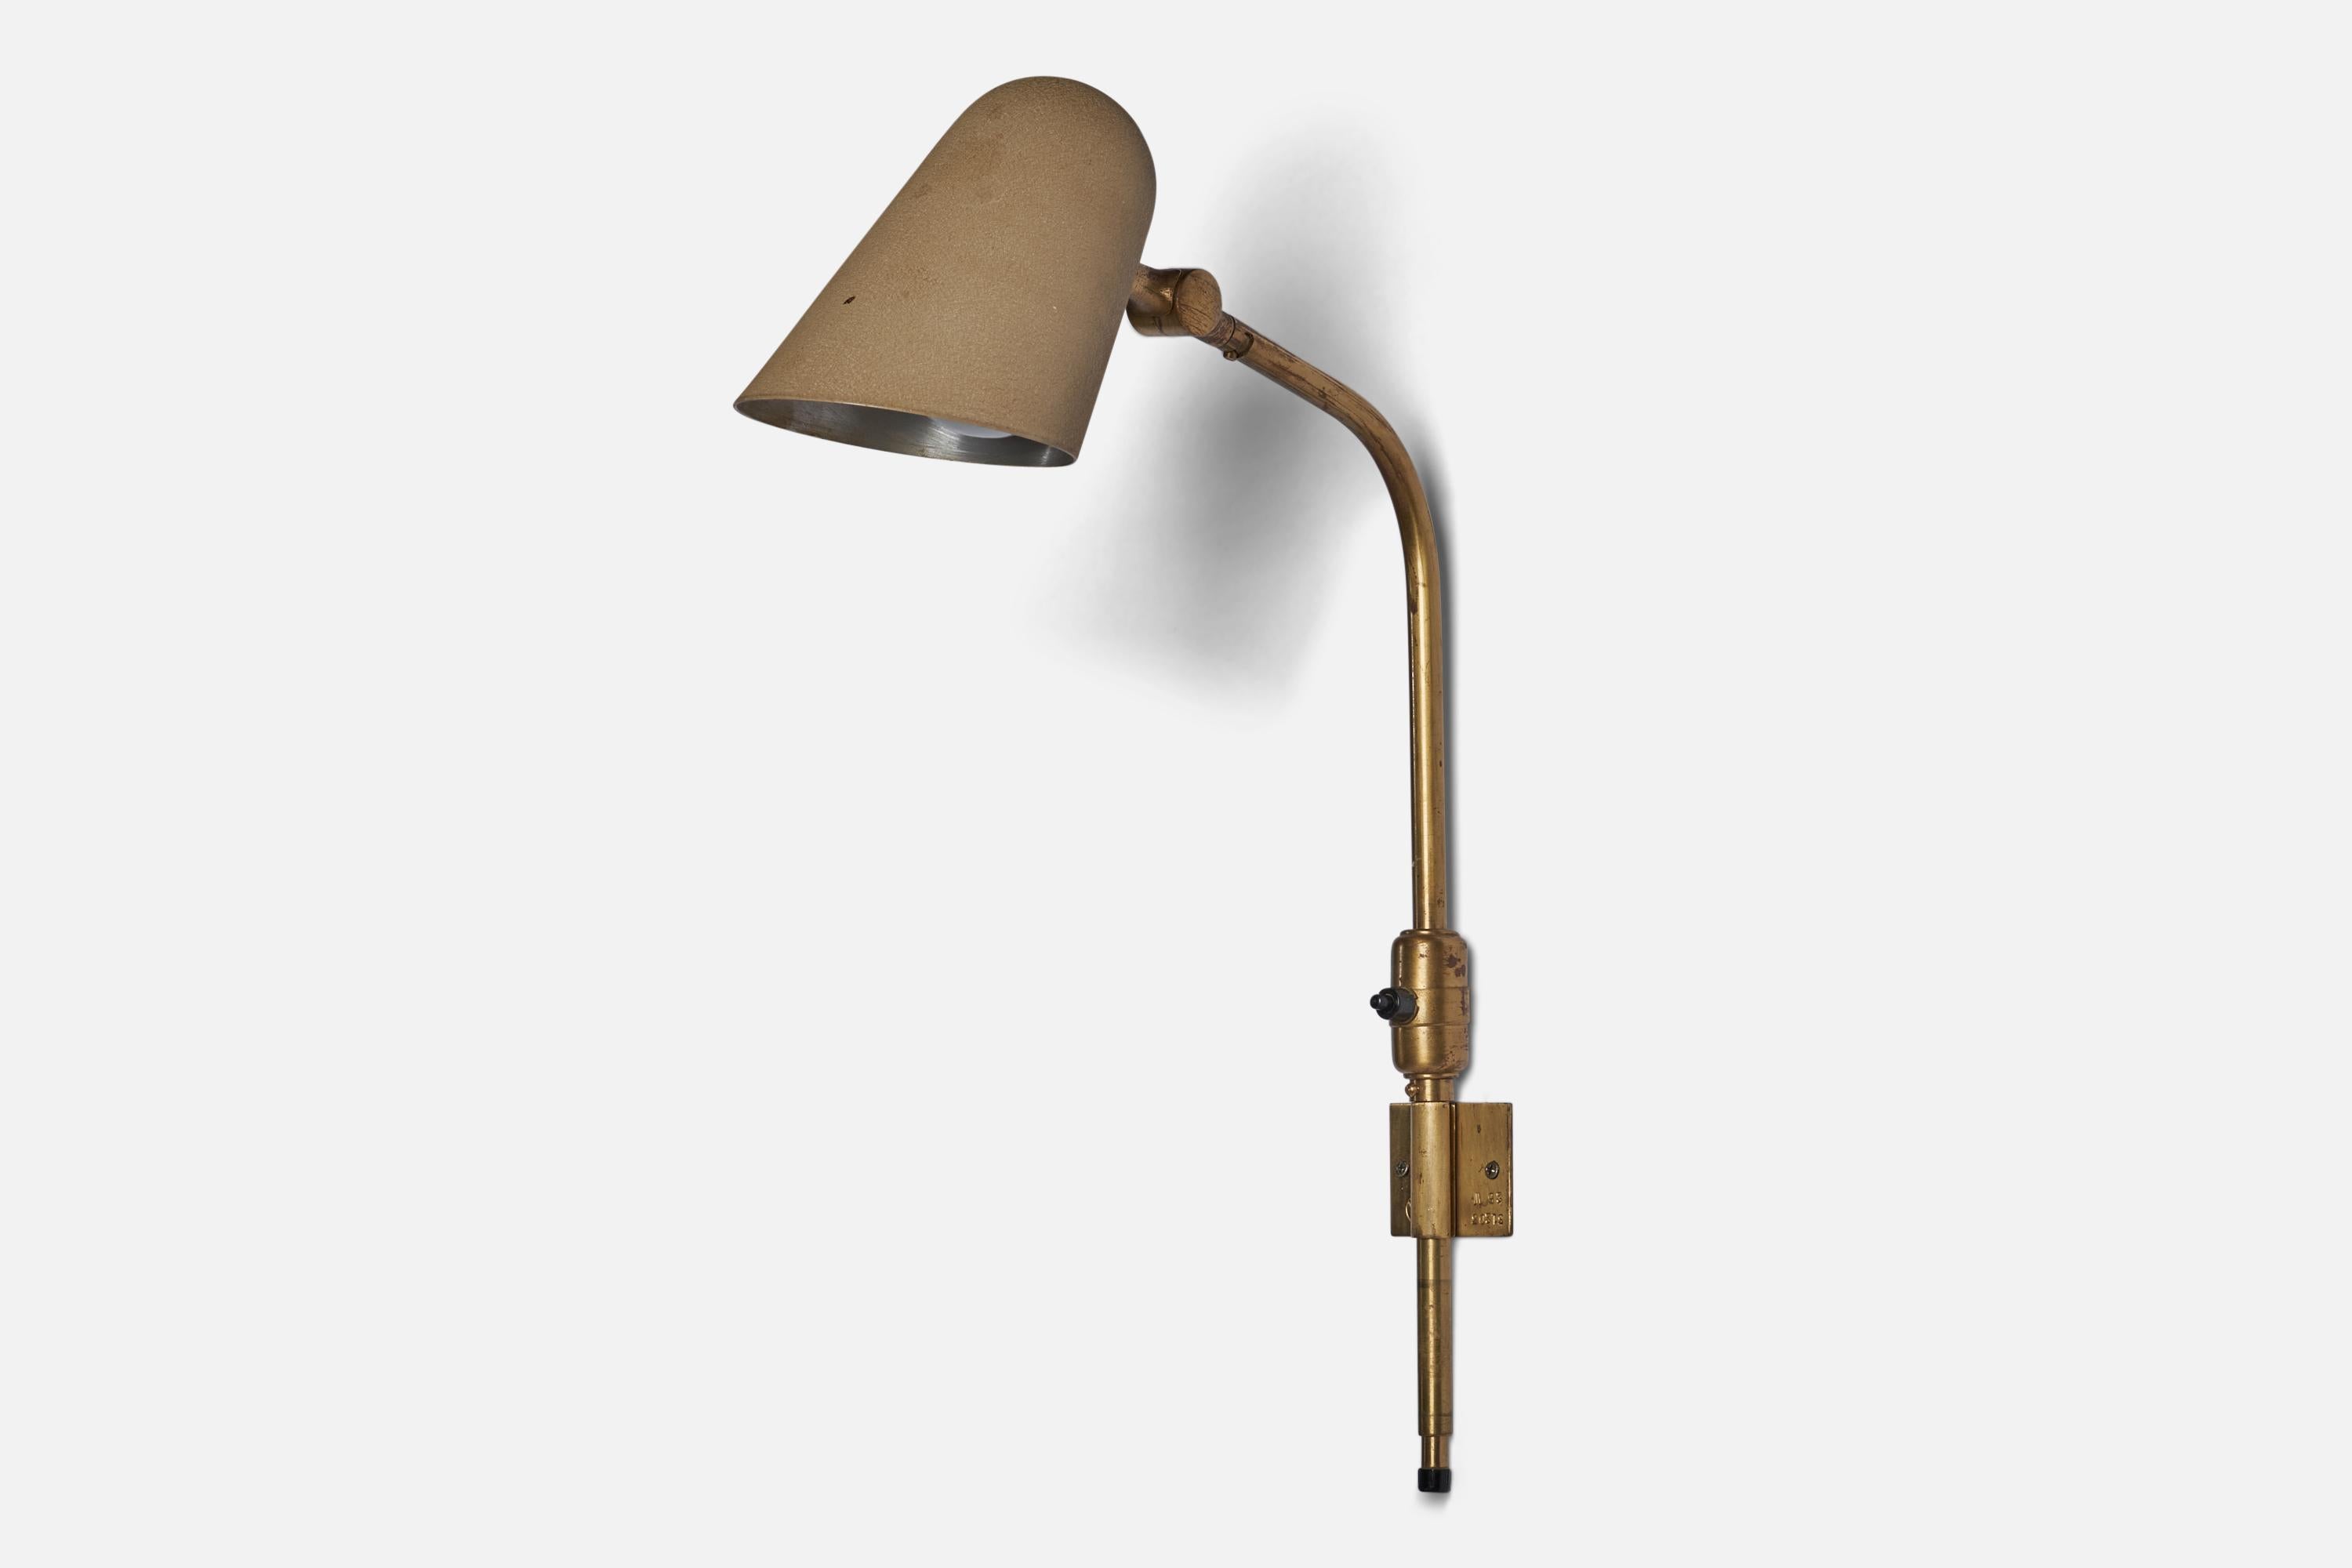 A brass and beige-lacquered metal wall light produced by Nordiska Kompaniet, Sweden, 1940s.

Overall Dimensions (inches): 20” H x 4.25” W x 12.5” D
Back Plate Dimensions (inches): 2” H x 2.4” W
Bulb Specifications: E-26 Bulb
Number of Sockets: 1
All